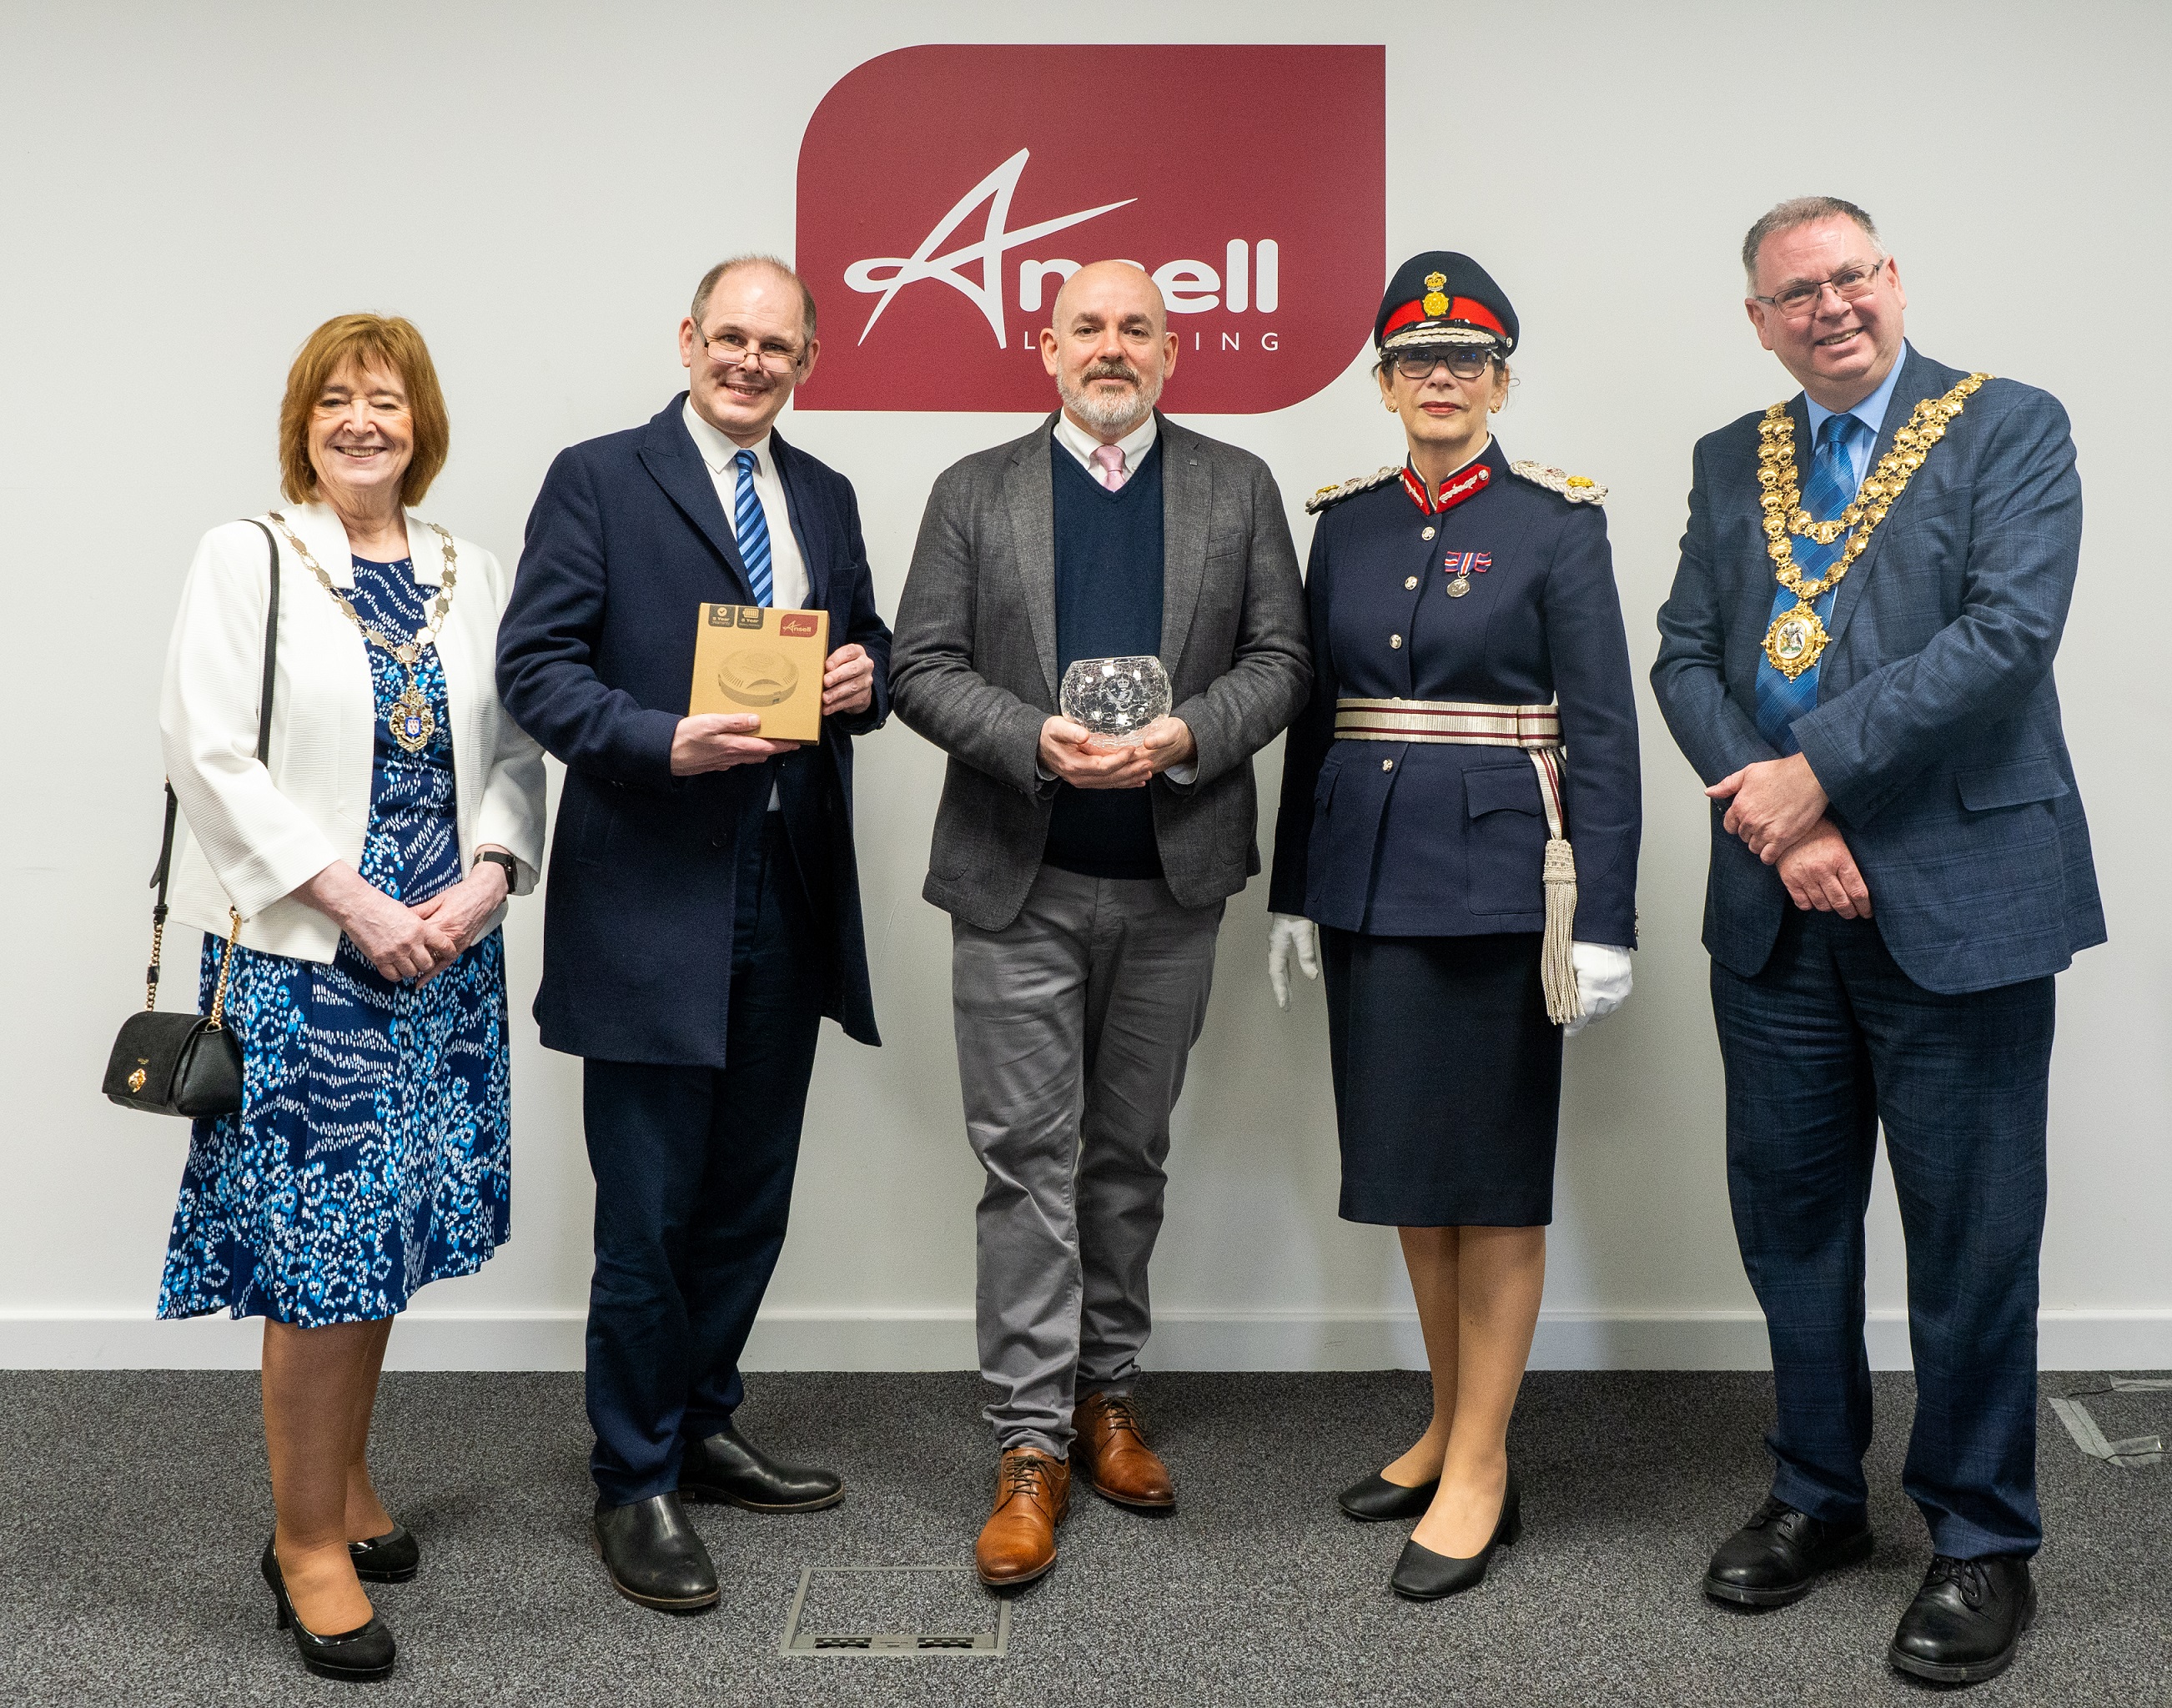 l-r. Deputy Mayor of Warrington, Councillor Carol Benson; MP for Leigh, Mr James Grundy; Mark Abbott, Managing director of Ansell Lighting; the Lord-Lieutenant of Greater Manchester, Mrs Diane Hawkins; Mayor of Wigan, Councillor Kevin Anderson.